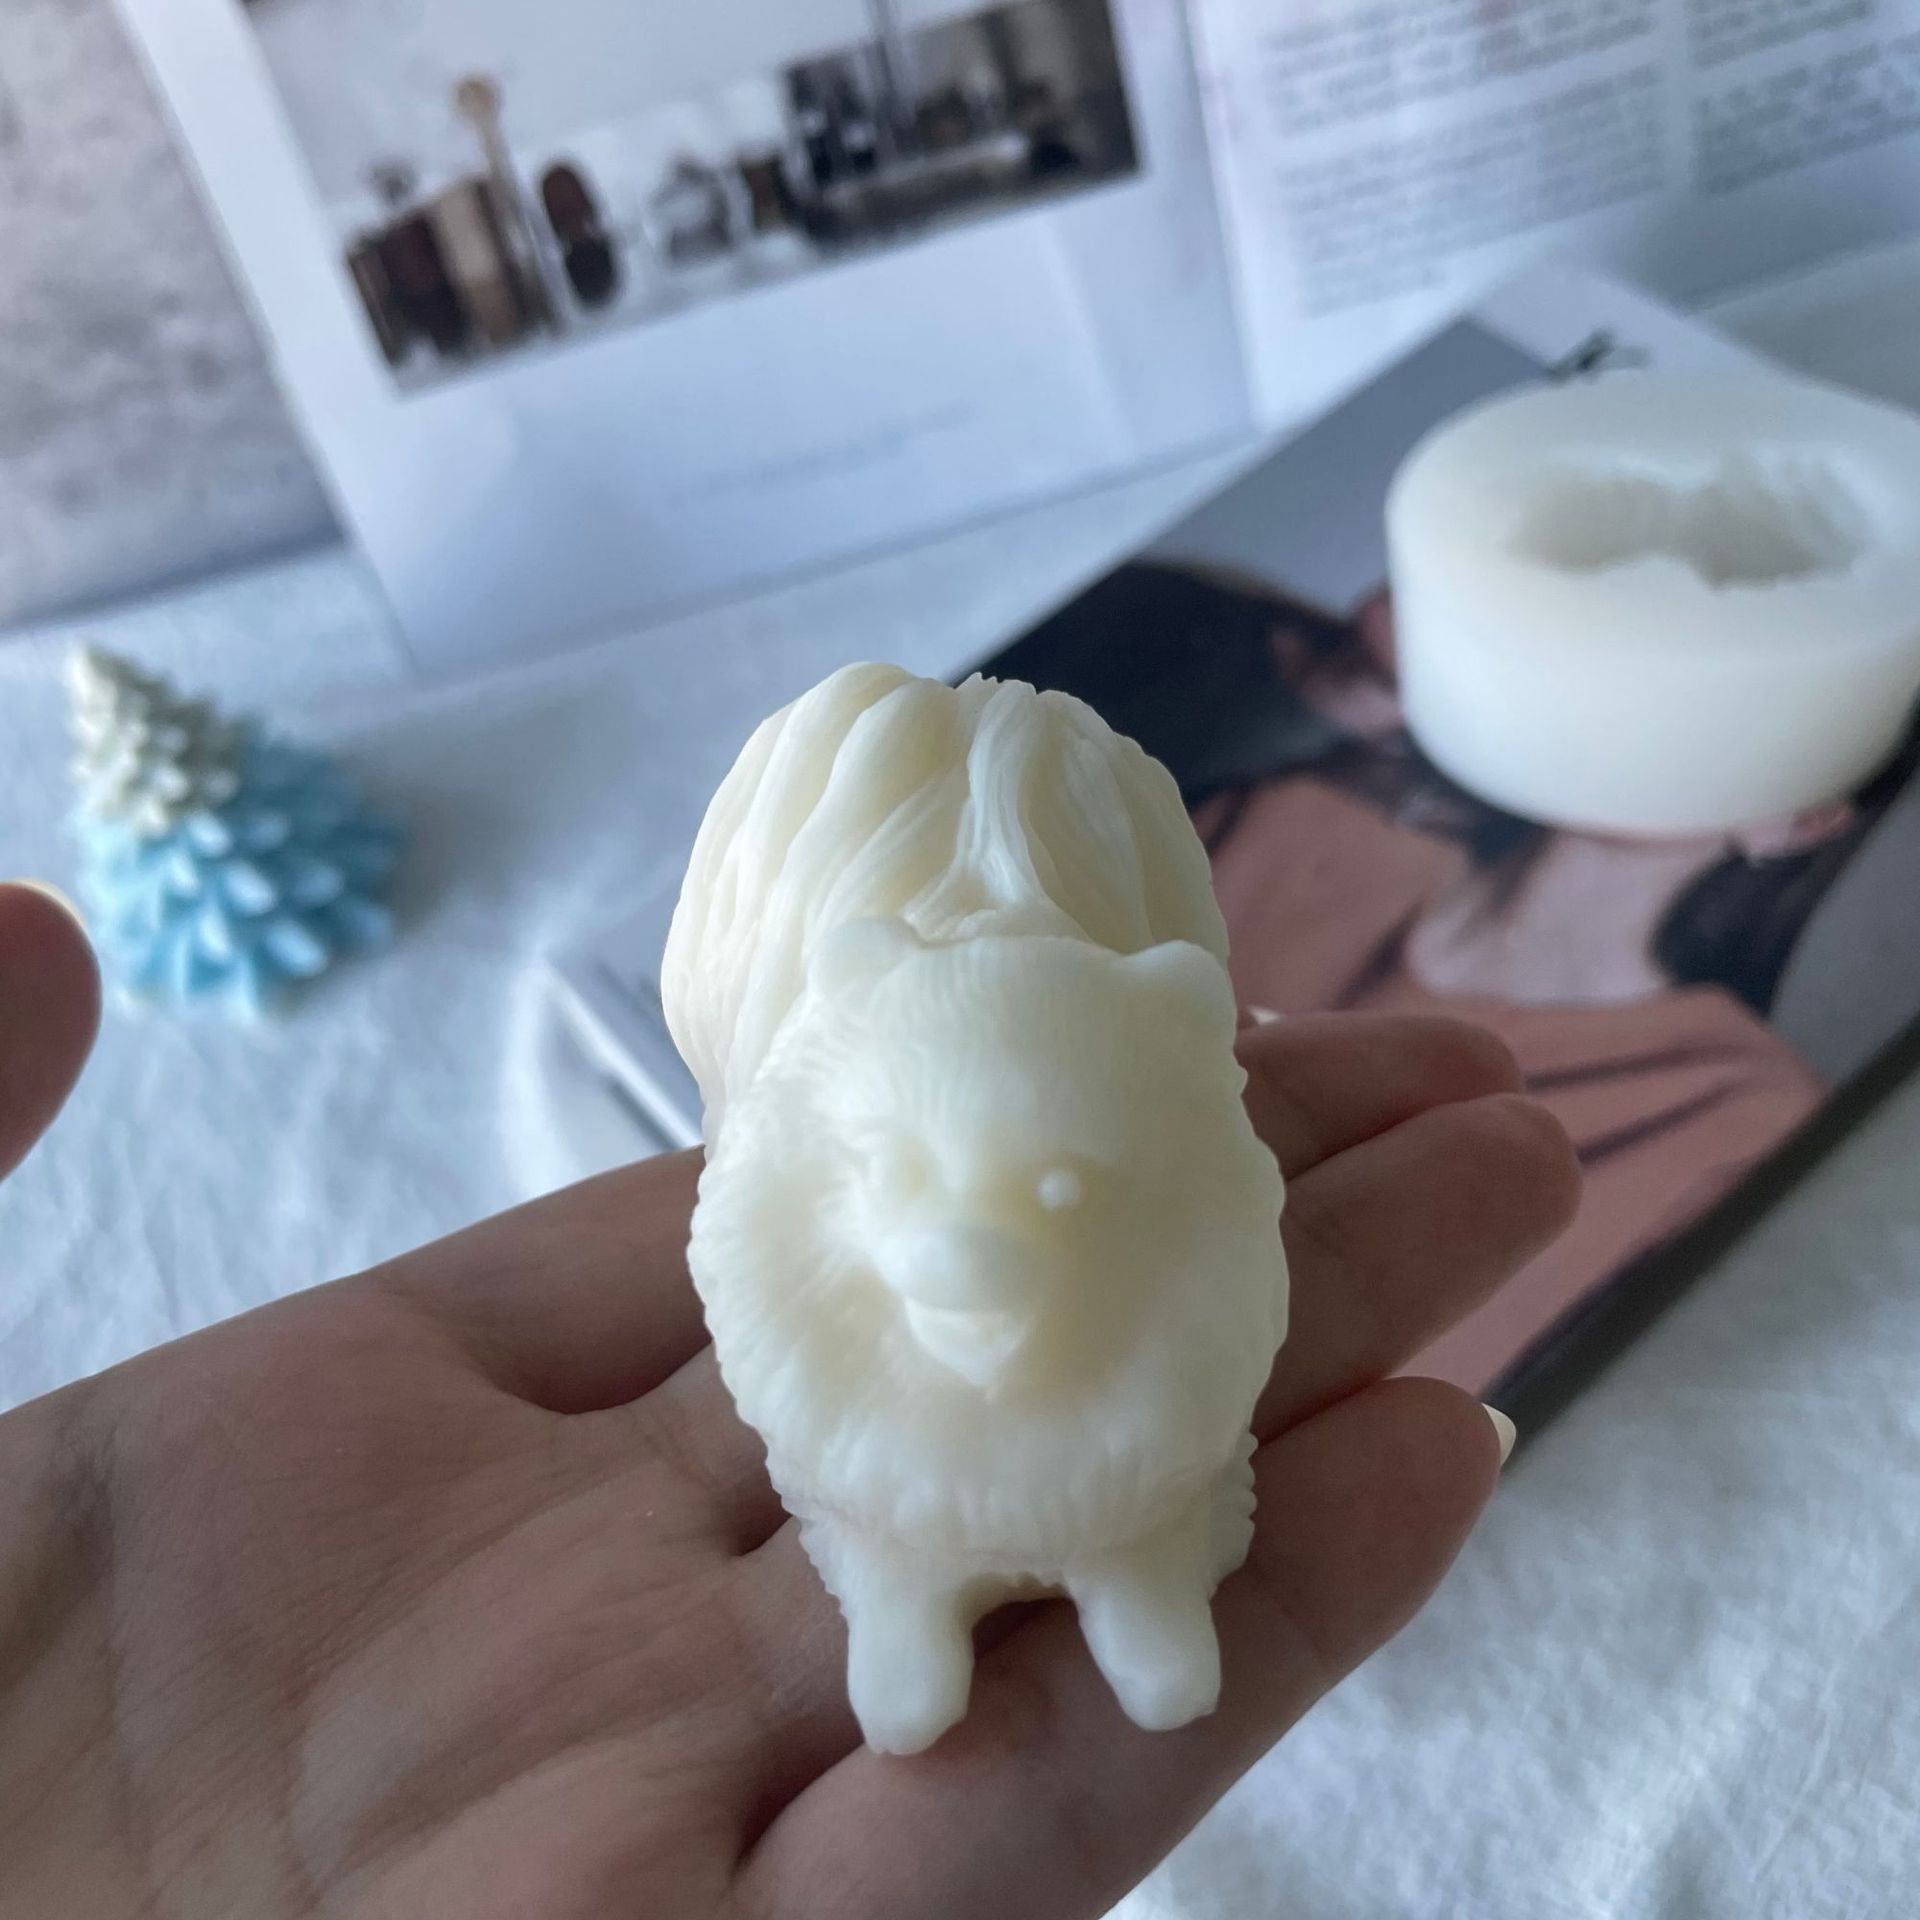 J6-130 3D Pet Canis Pomeranian Cake Silicone Plaster soap Candle Mold DIY Cute Pomeranian dog Silicone Candle Mold